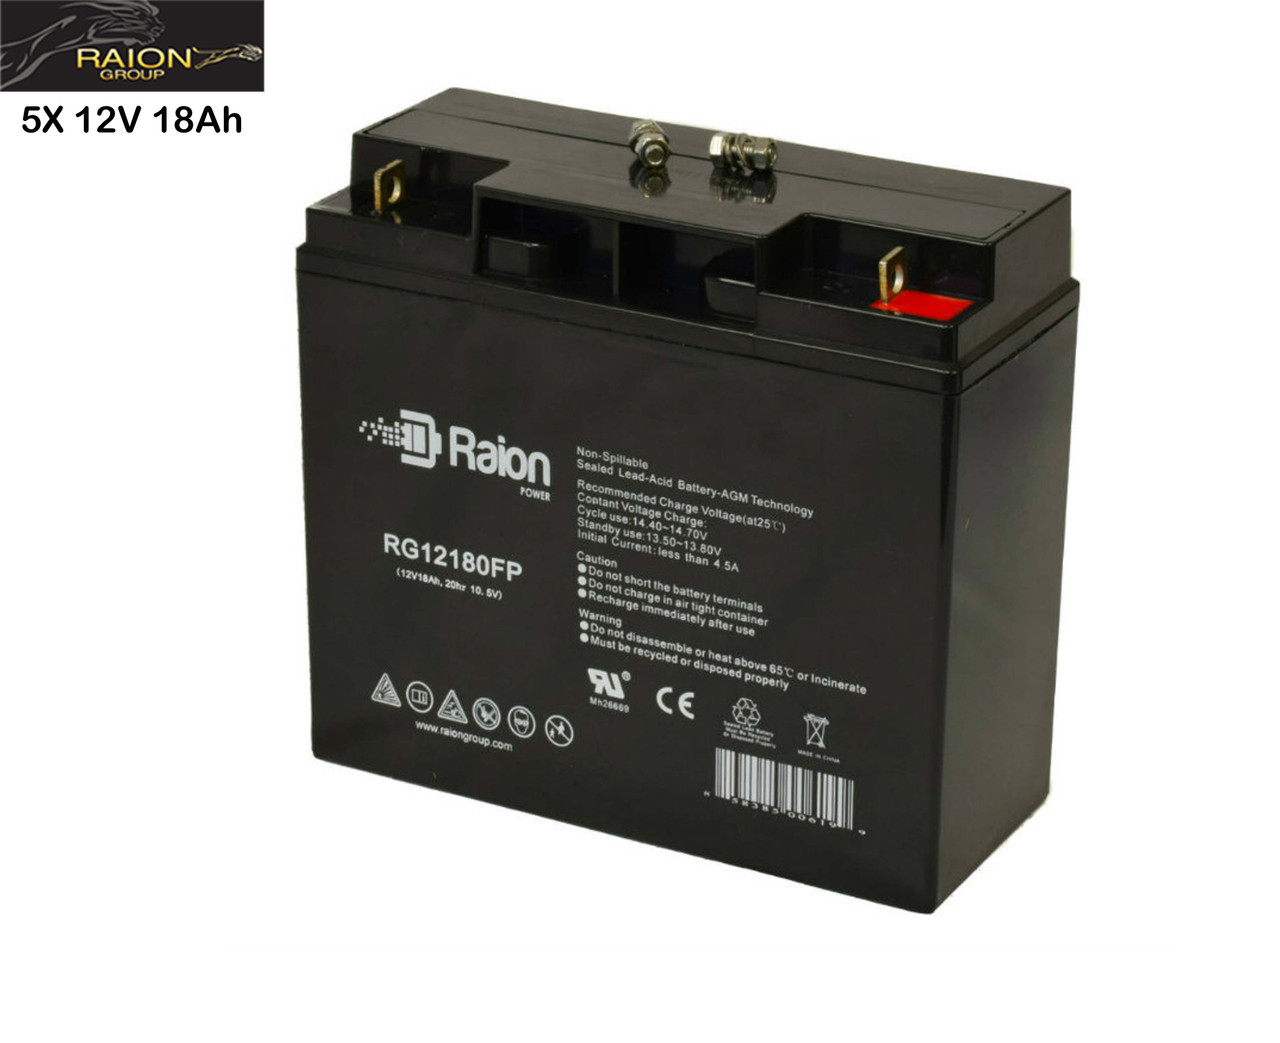 Raion Power Replacement 12V 18Ah Battery for Daymak Daytona Deluxe - 5 Pack